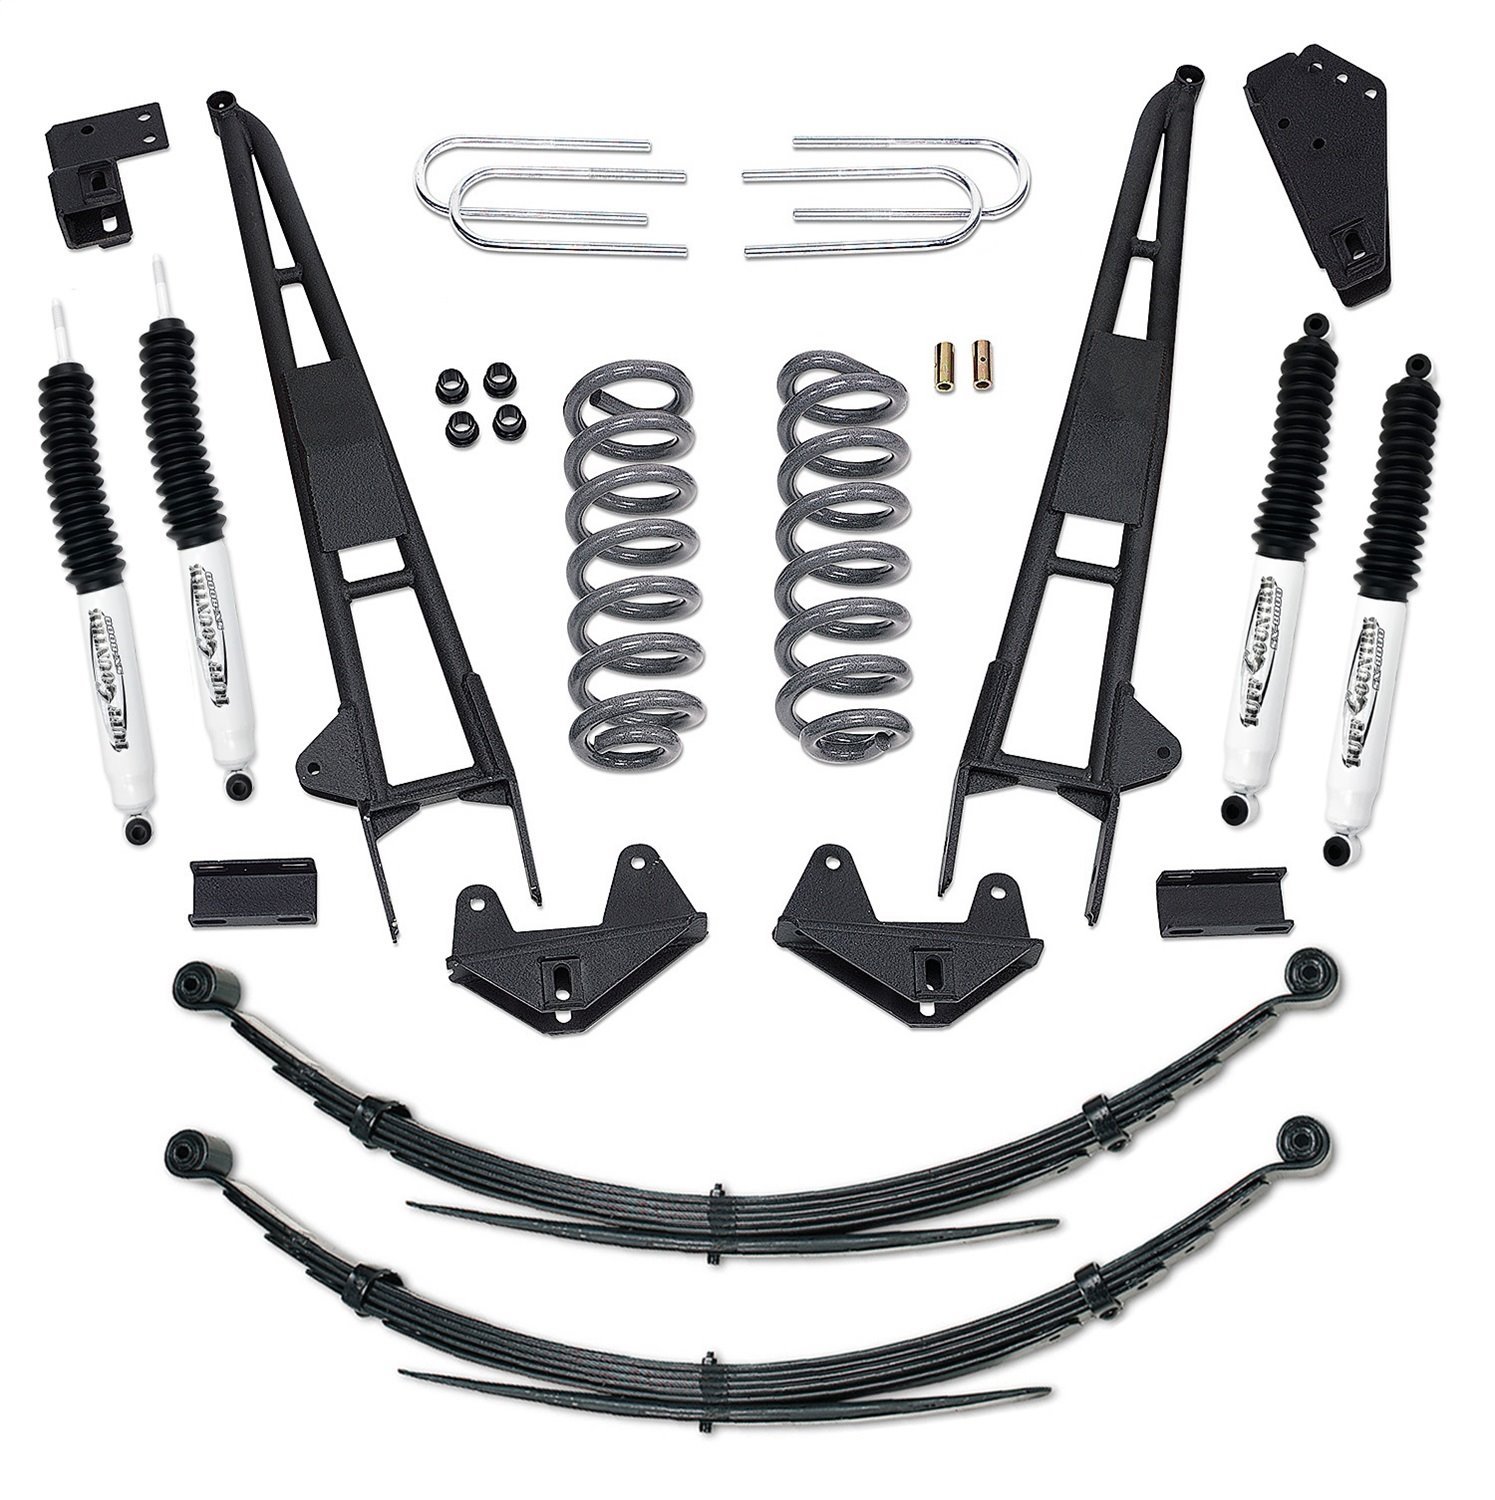 Suspension Lift Kit 1981-96 Ford F150 & Bronco 4wd